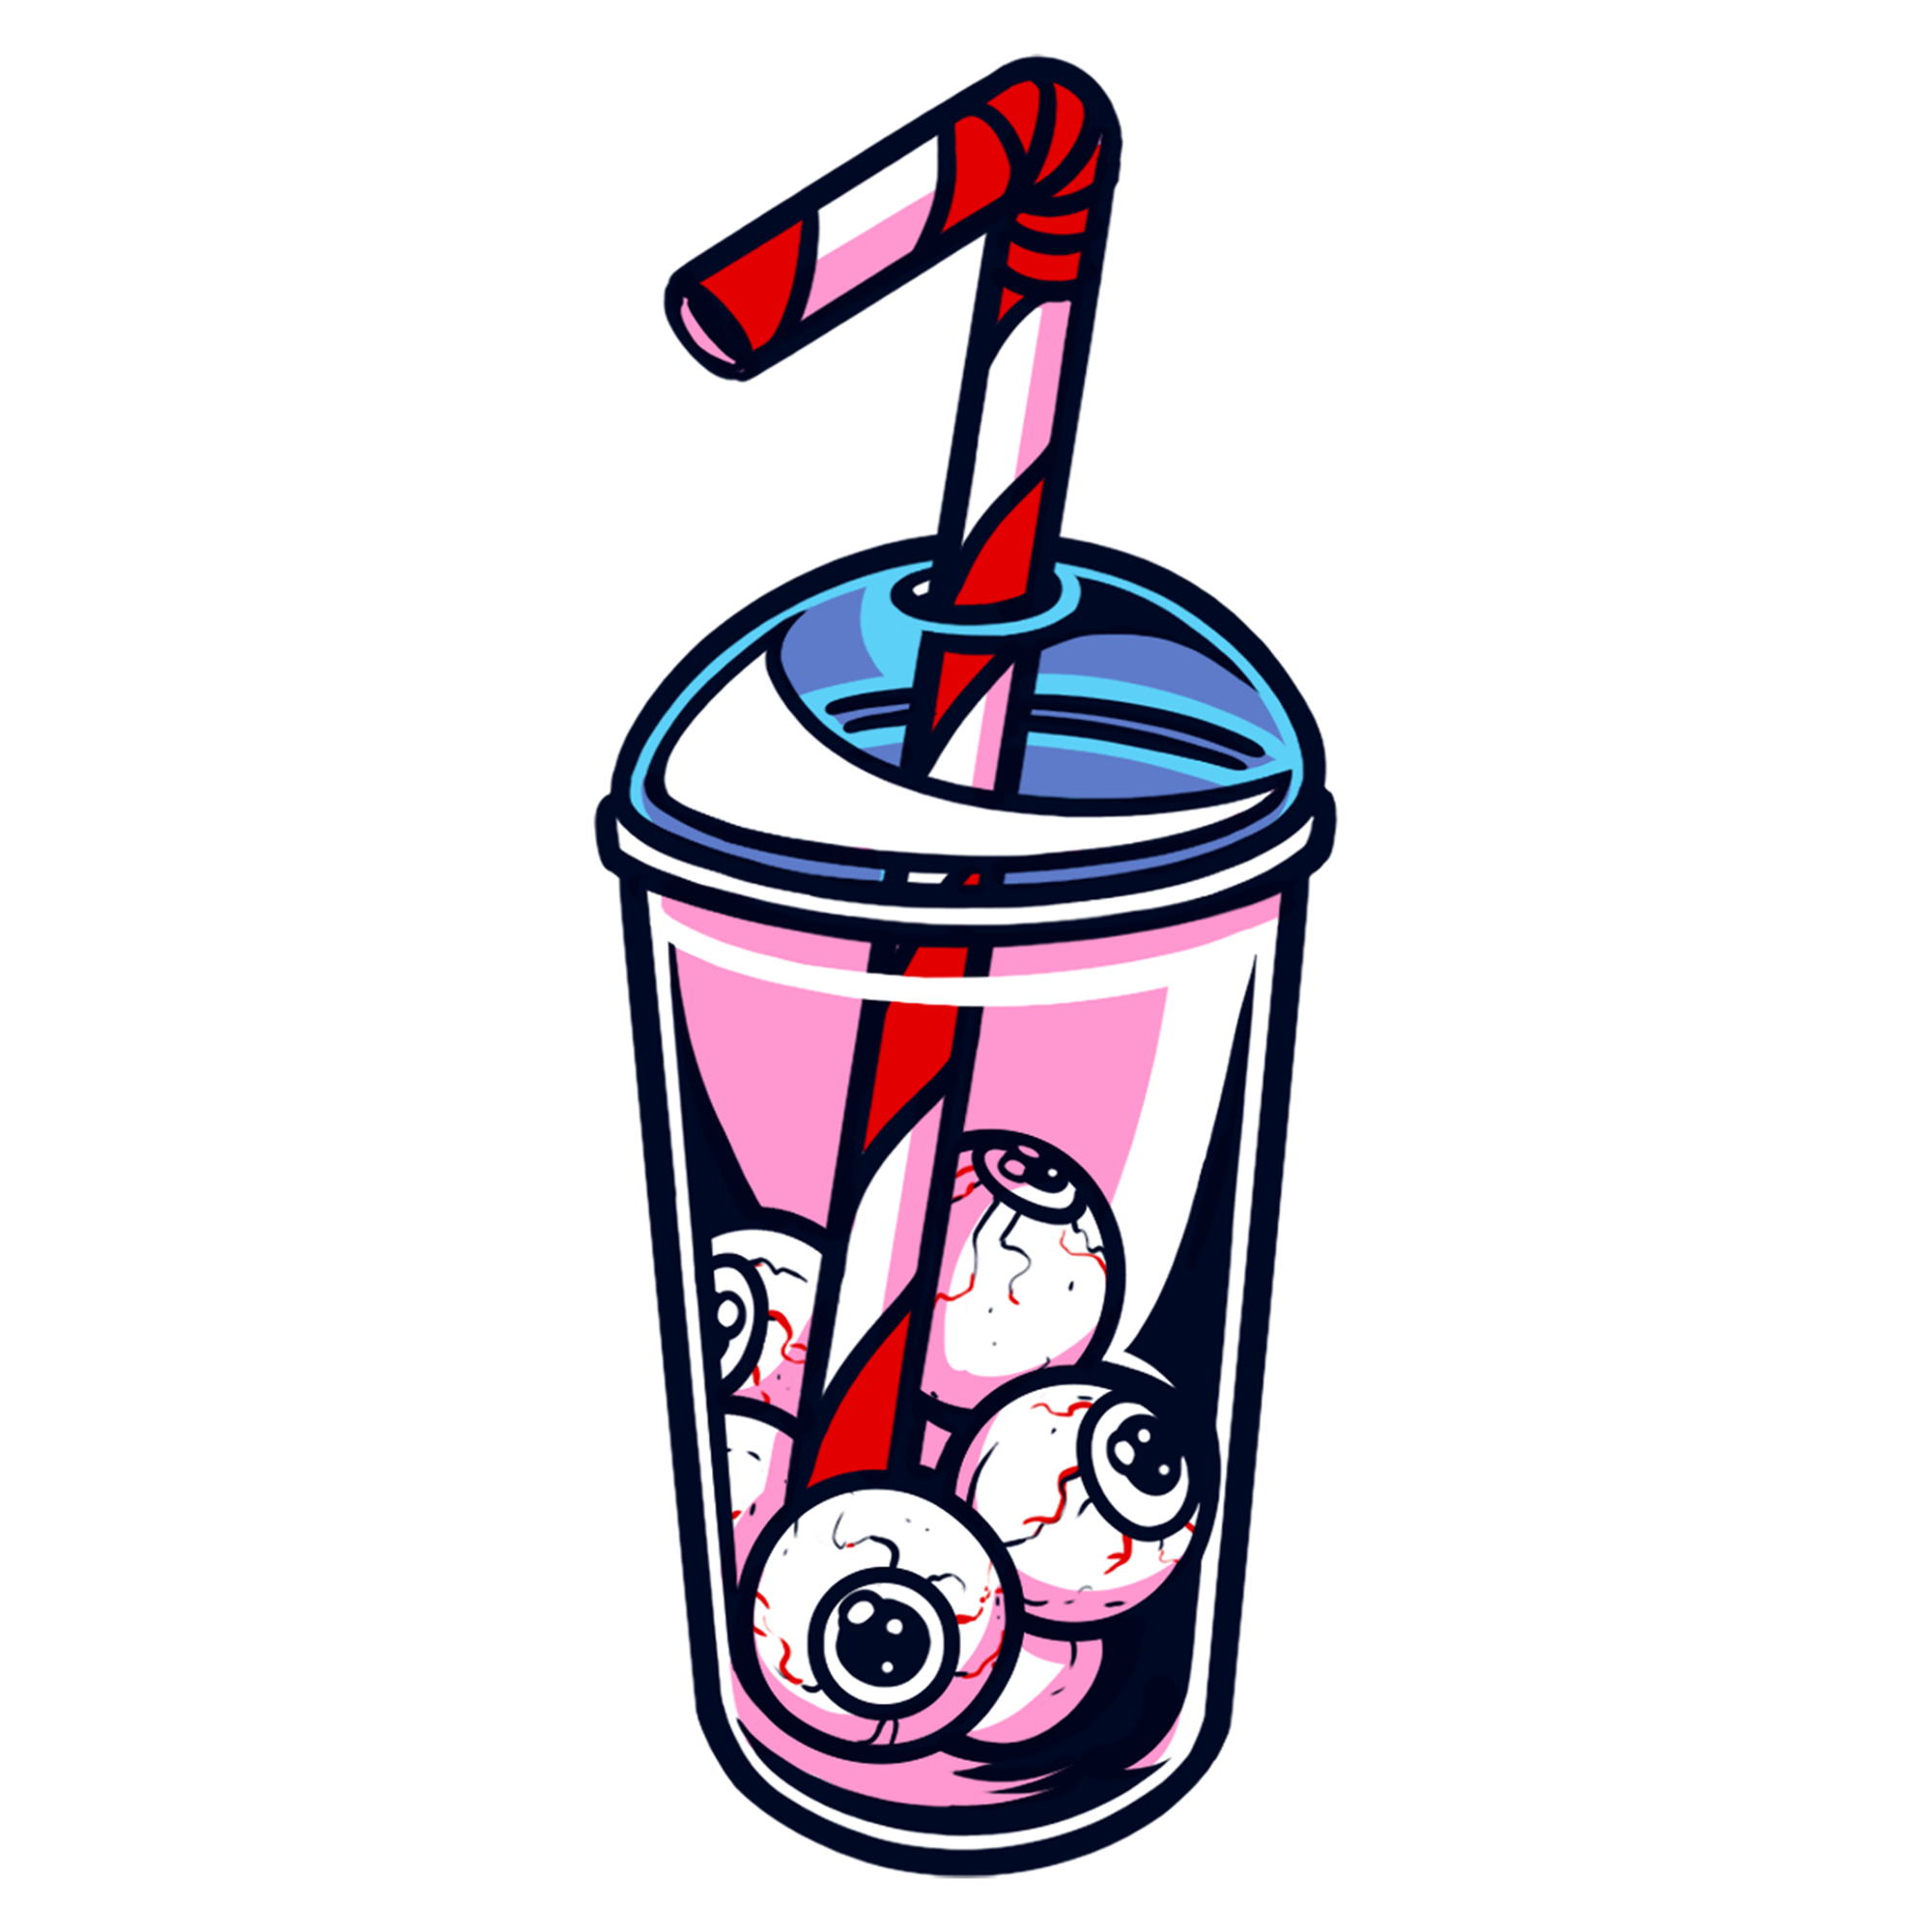 Graphic sticker of the cup with a boba tea